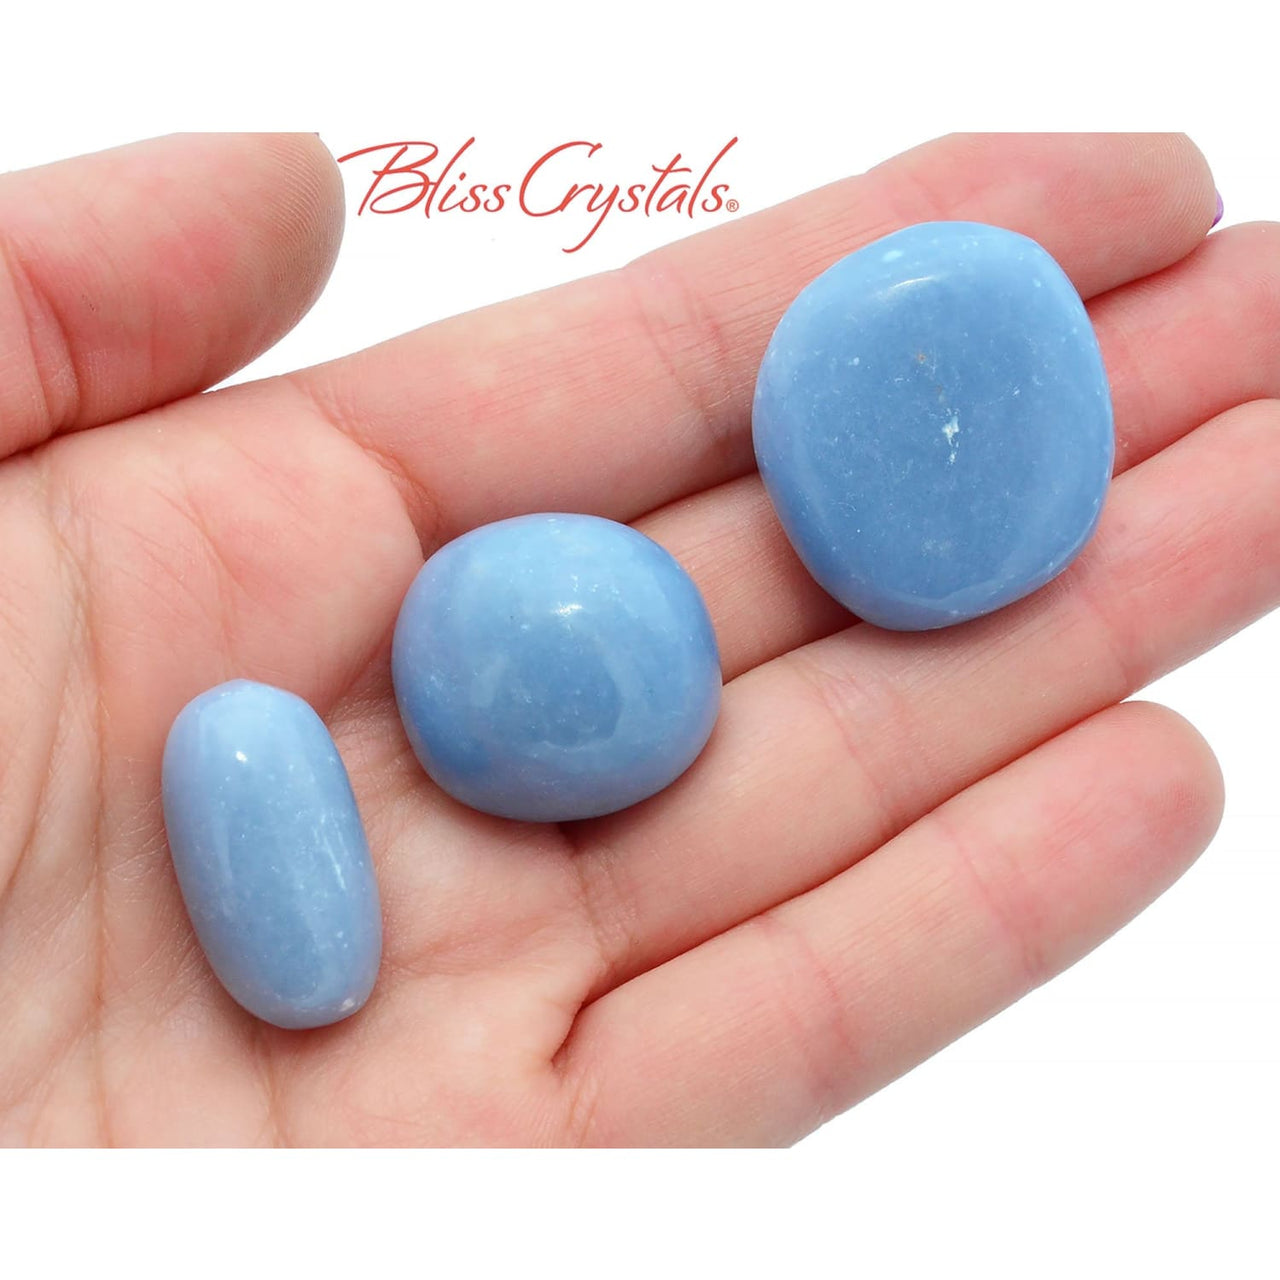 1 Angelite Tumbled Stone Healing Crystal and Stone for 